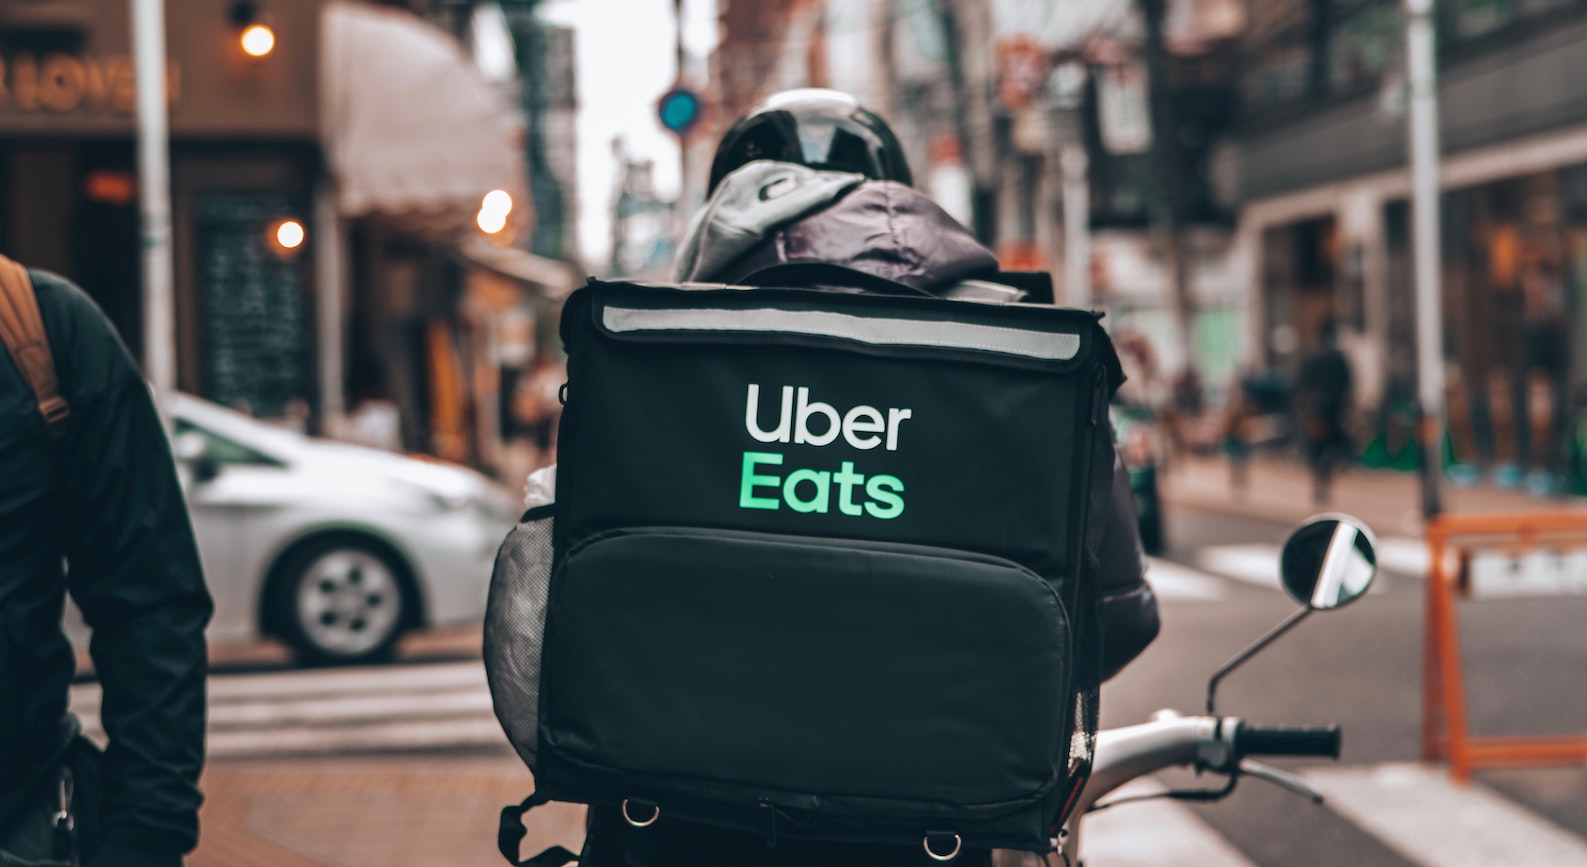 A food storage on the back of the motorcycle has a printed name of Uber Eats